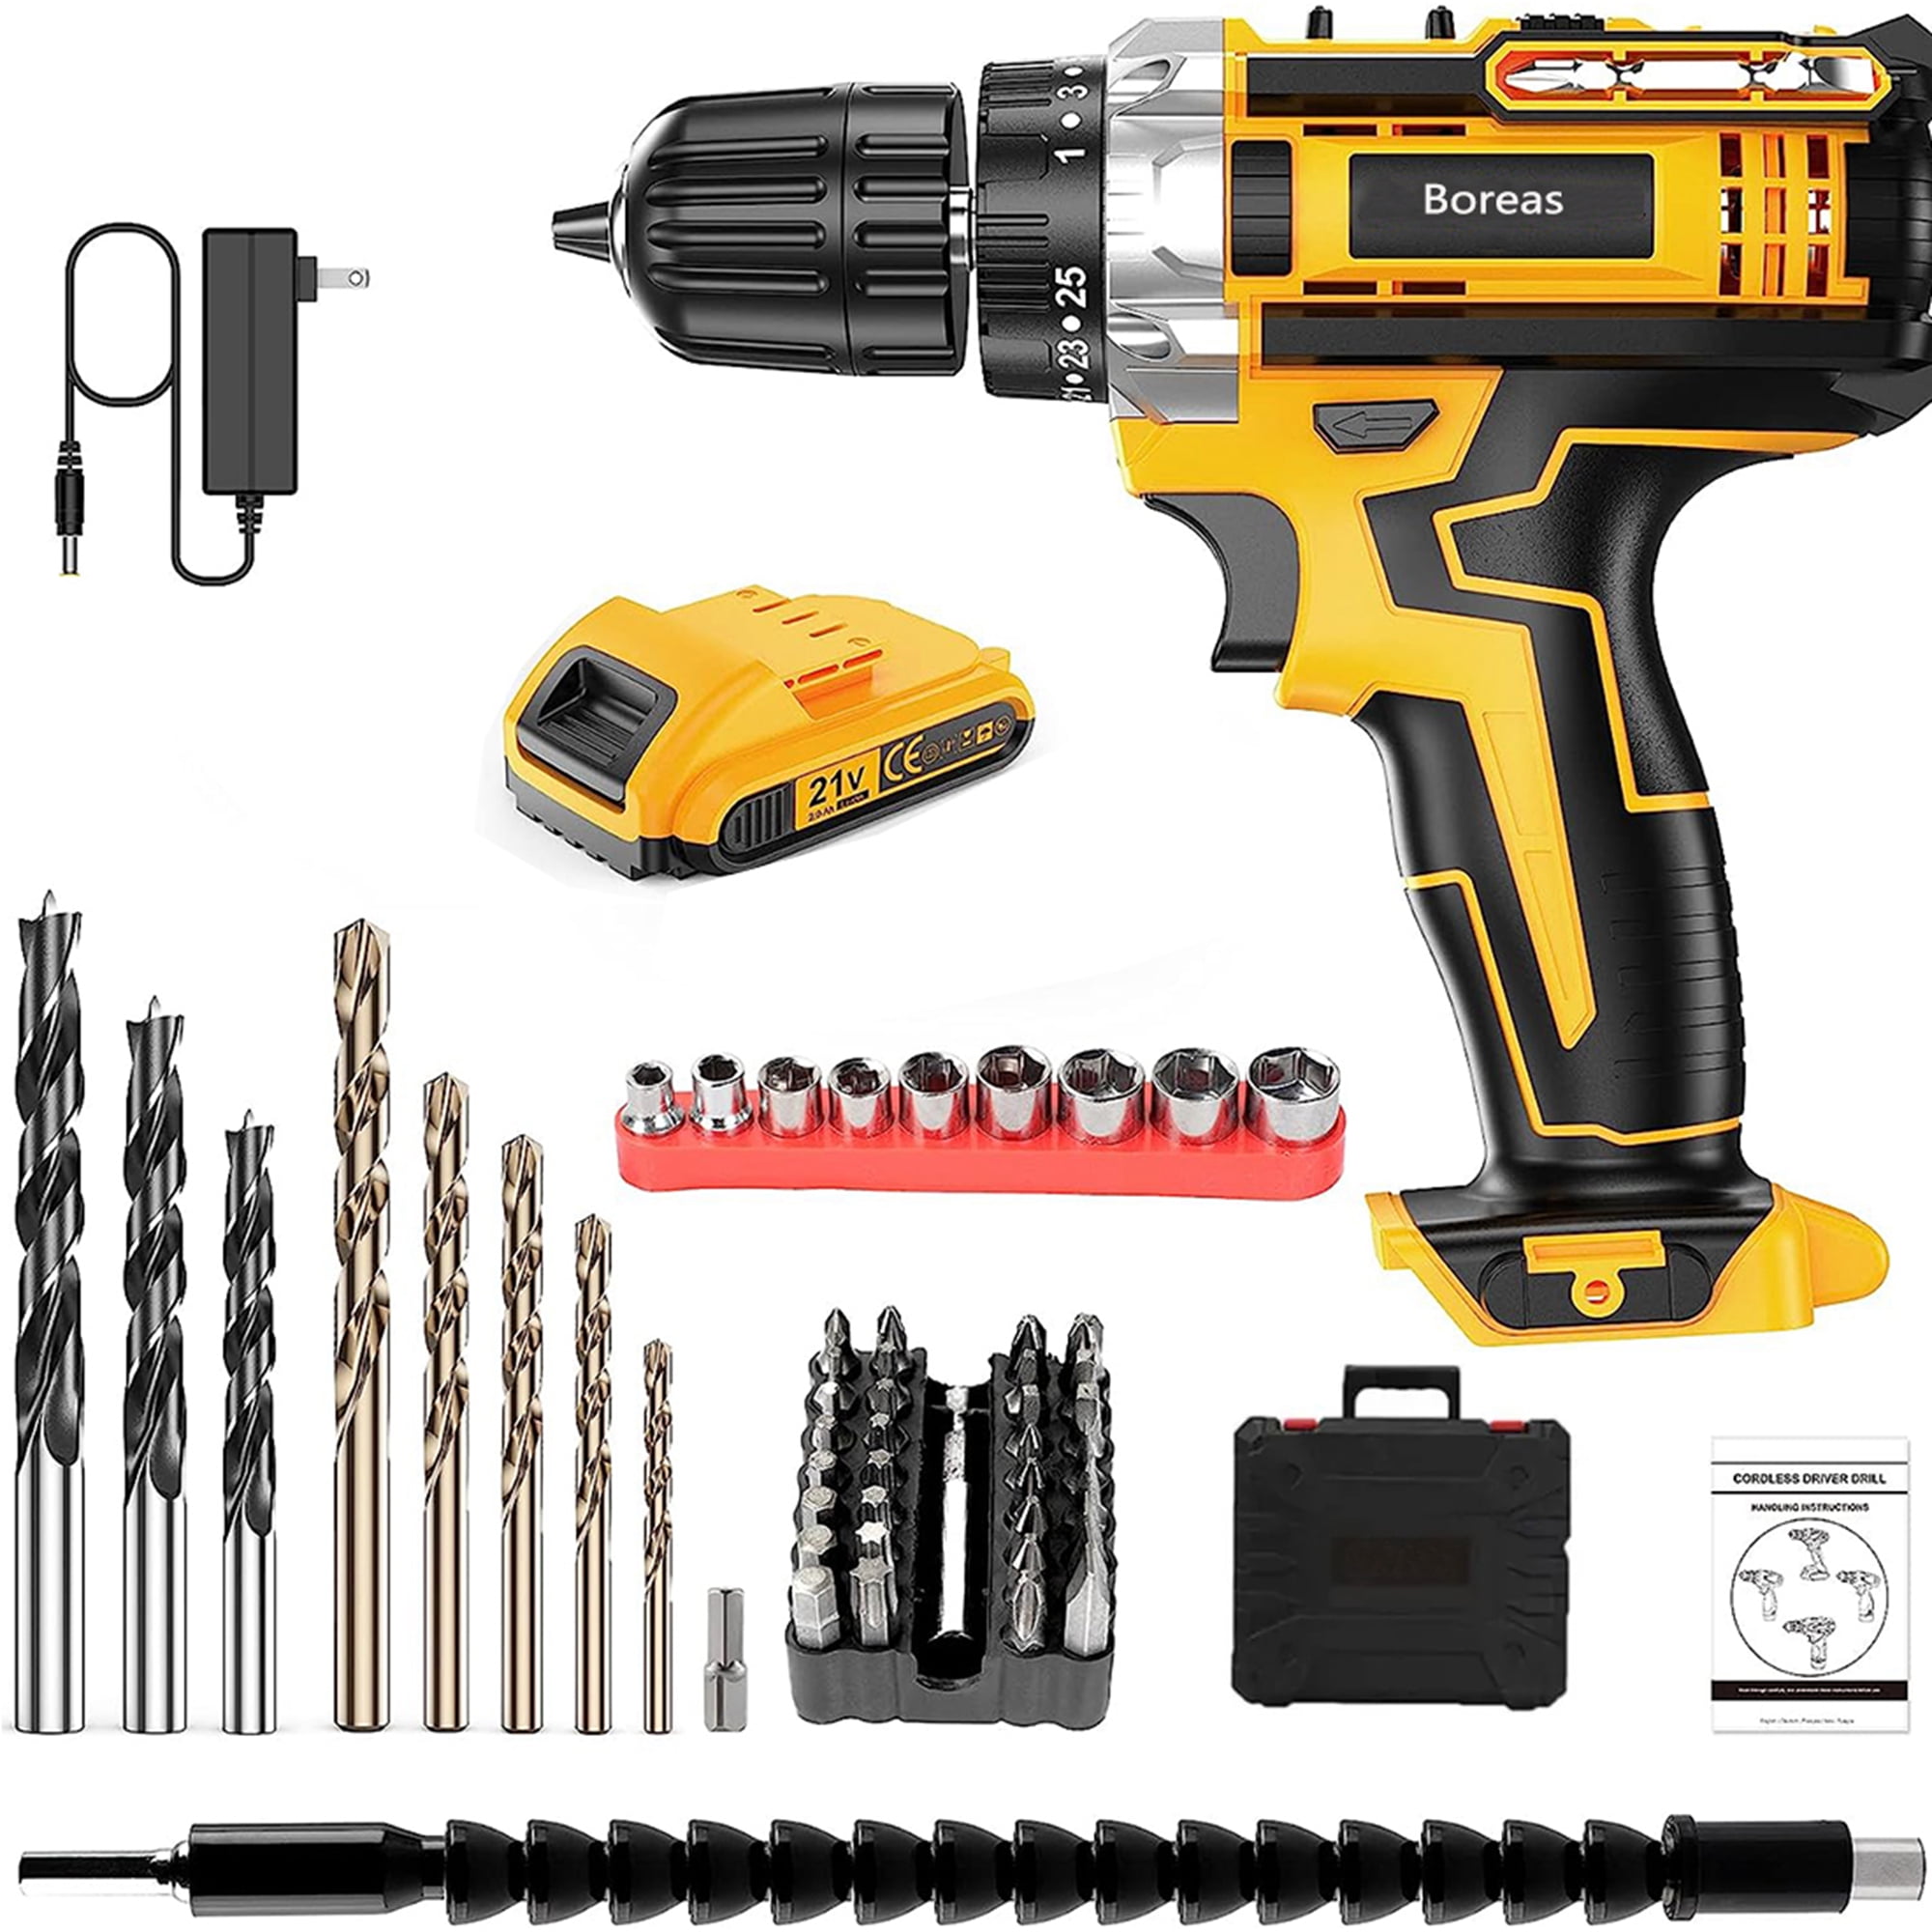 Boreas Cordless Drill Set, 12V Electric Drill Driver with 42 Acessories,  Home Power Drill Cordless with 3/8 Keyless Chuck, 2 Speed, 18+1 Position,  Built-in LED, Clutch Drill for Home DIY Projects 